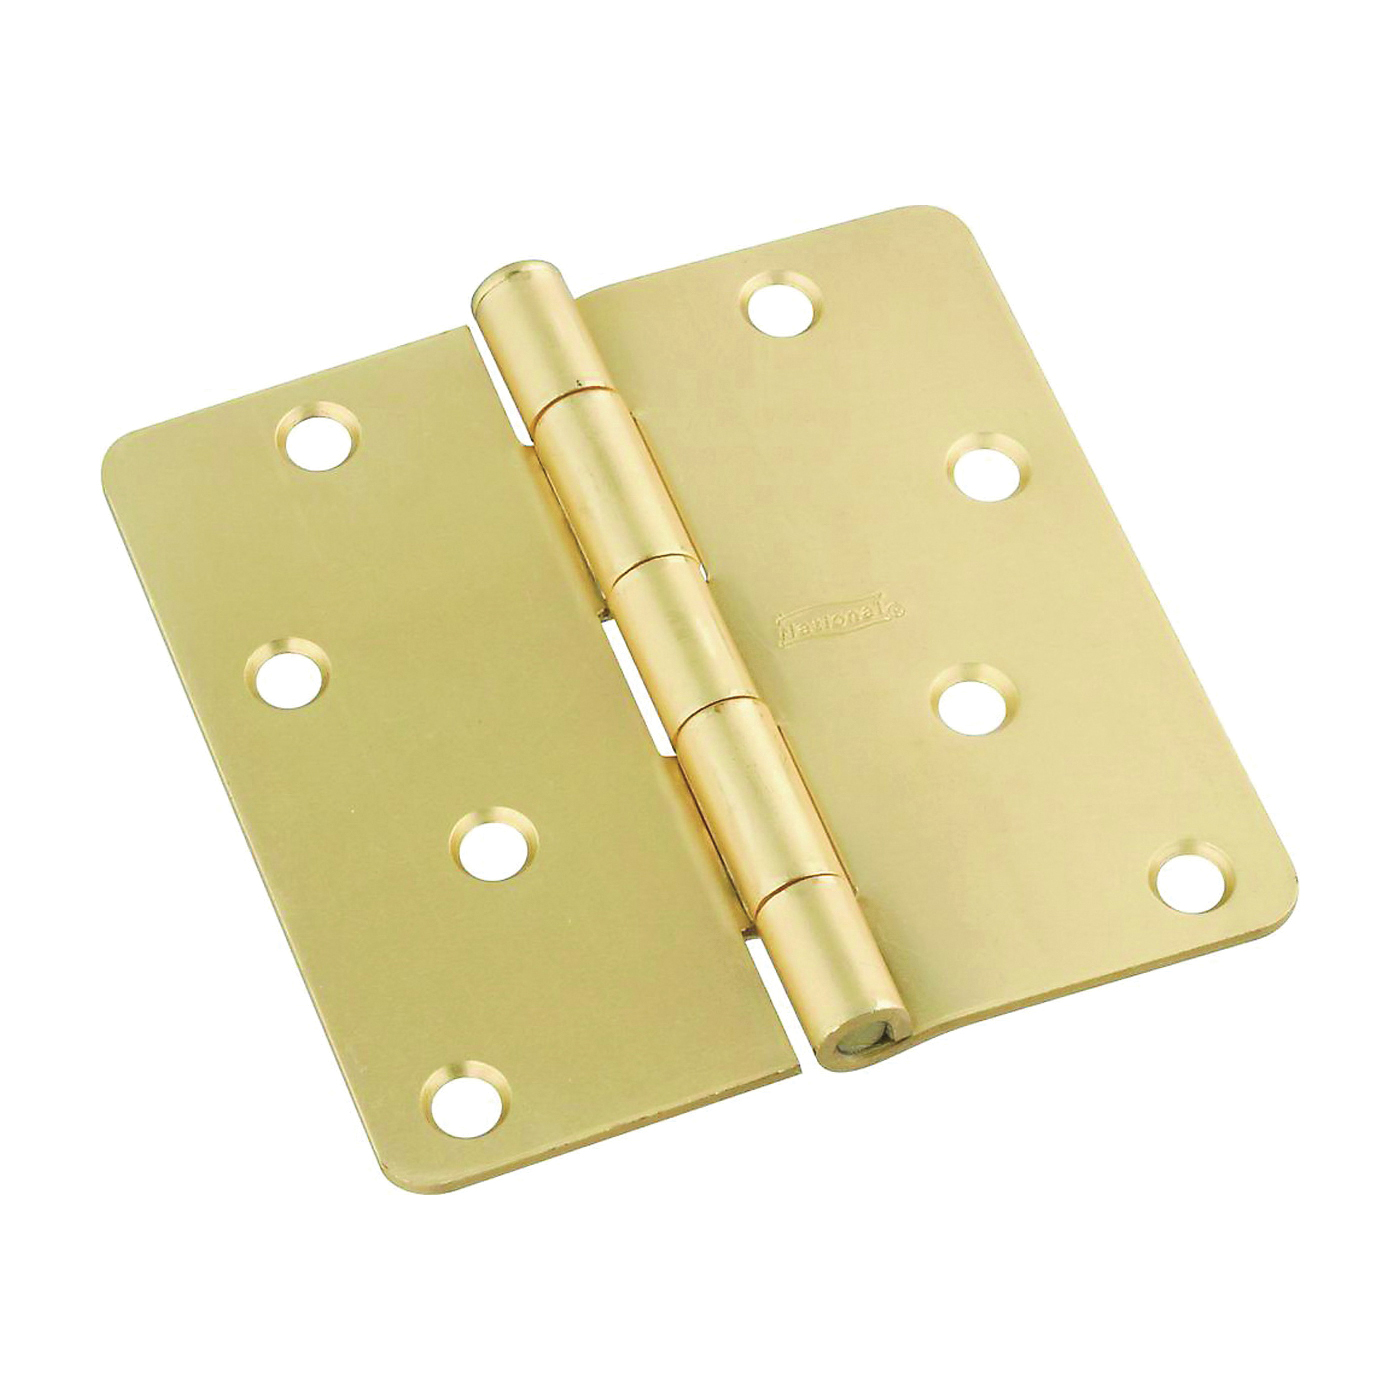 National Hardware N830-228 Door Hinge, Cold Rolled Steel, Satin Brass, Non-Rising, Removable Pin, 55 lb - 1